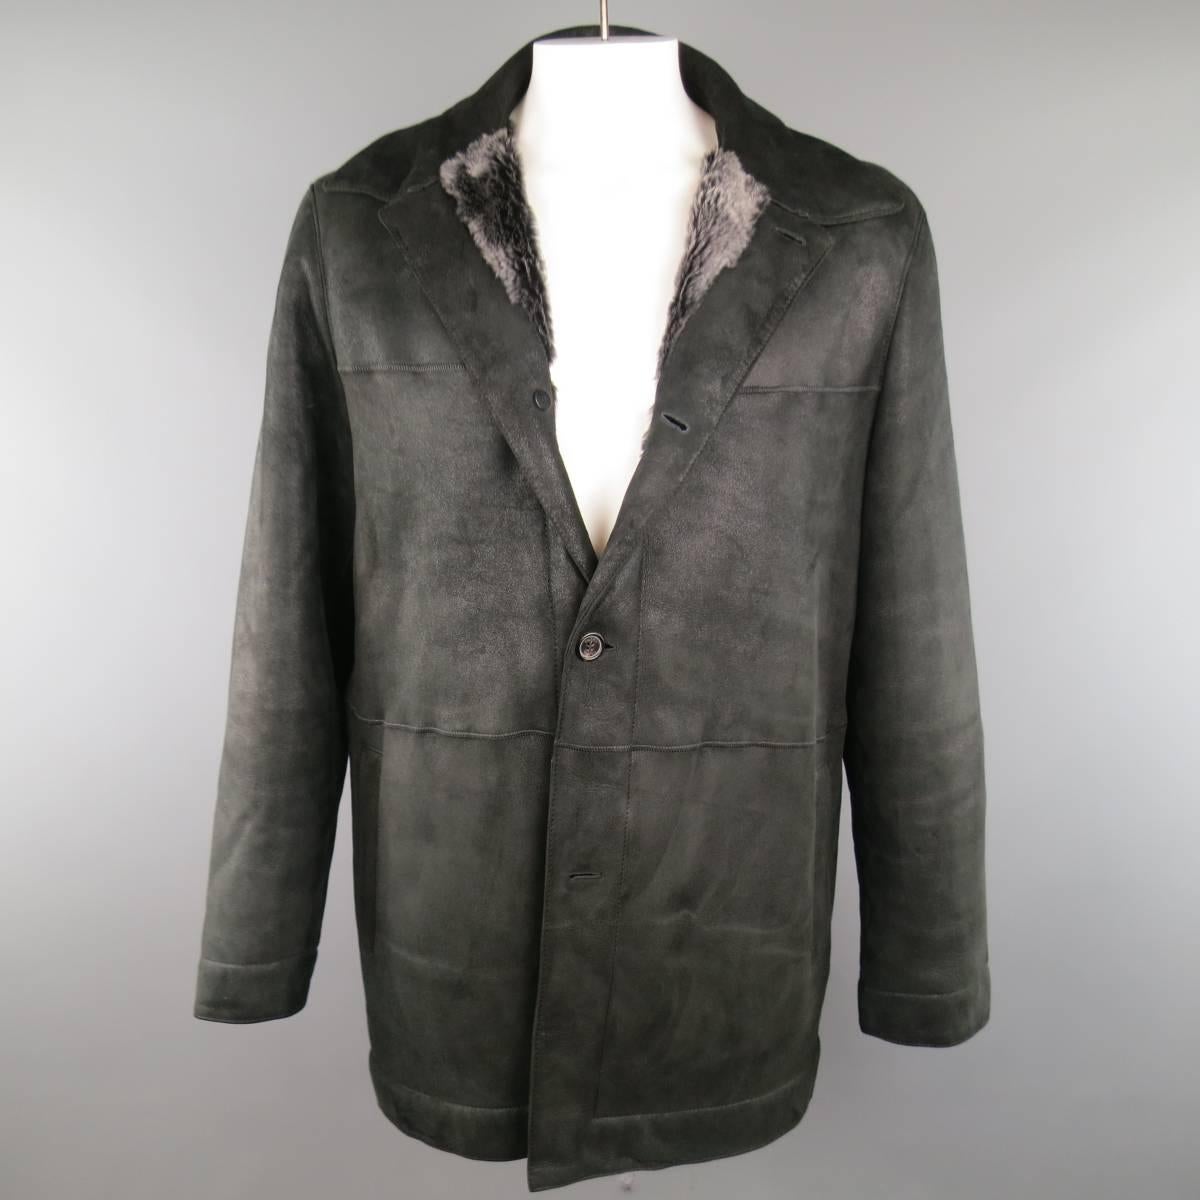 Classic PRADA button up coat in a soft black shearling featuring a sueded exterior with pointed collar and slanted pockets with dyed fur lining. Wear throughout. As-Is. Made in Italy.
 
Good Pre-Owned Condition.
Marked: 56
 
Measurements:
